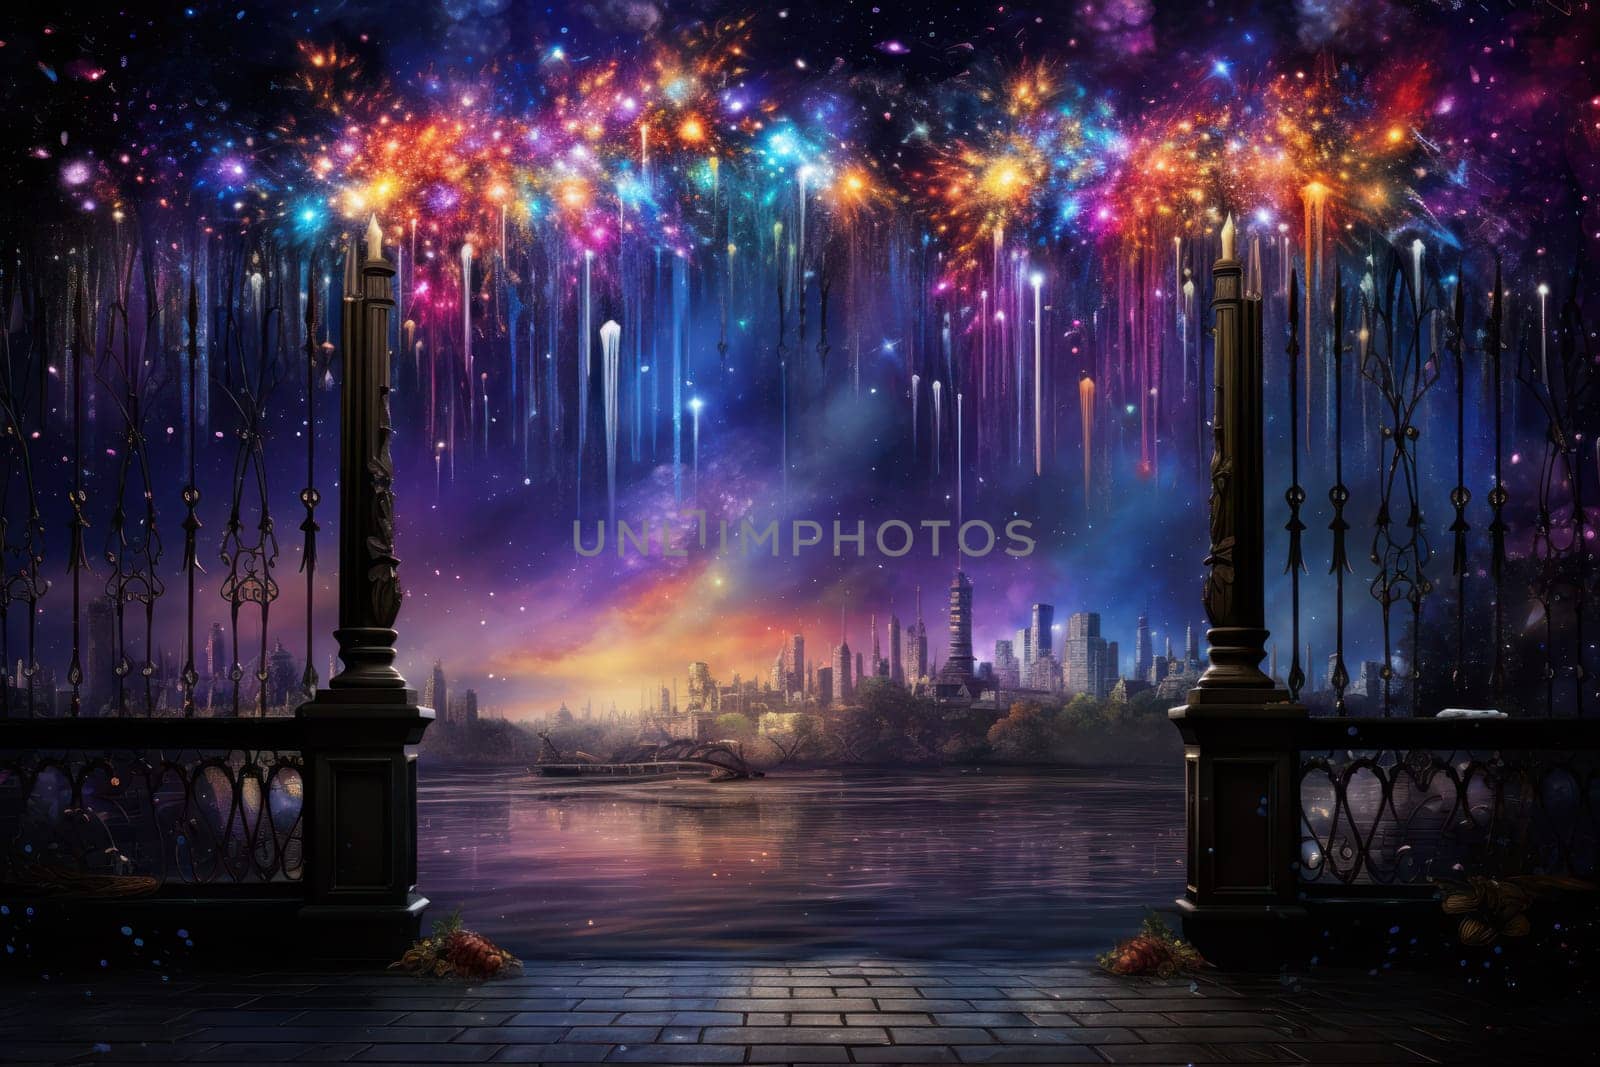 An electrifying display of winter's nocturnal splendor, featuring the dazzling spectacle of New Year's Eve fireworks and other seasonal celebrations.